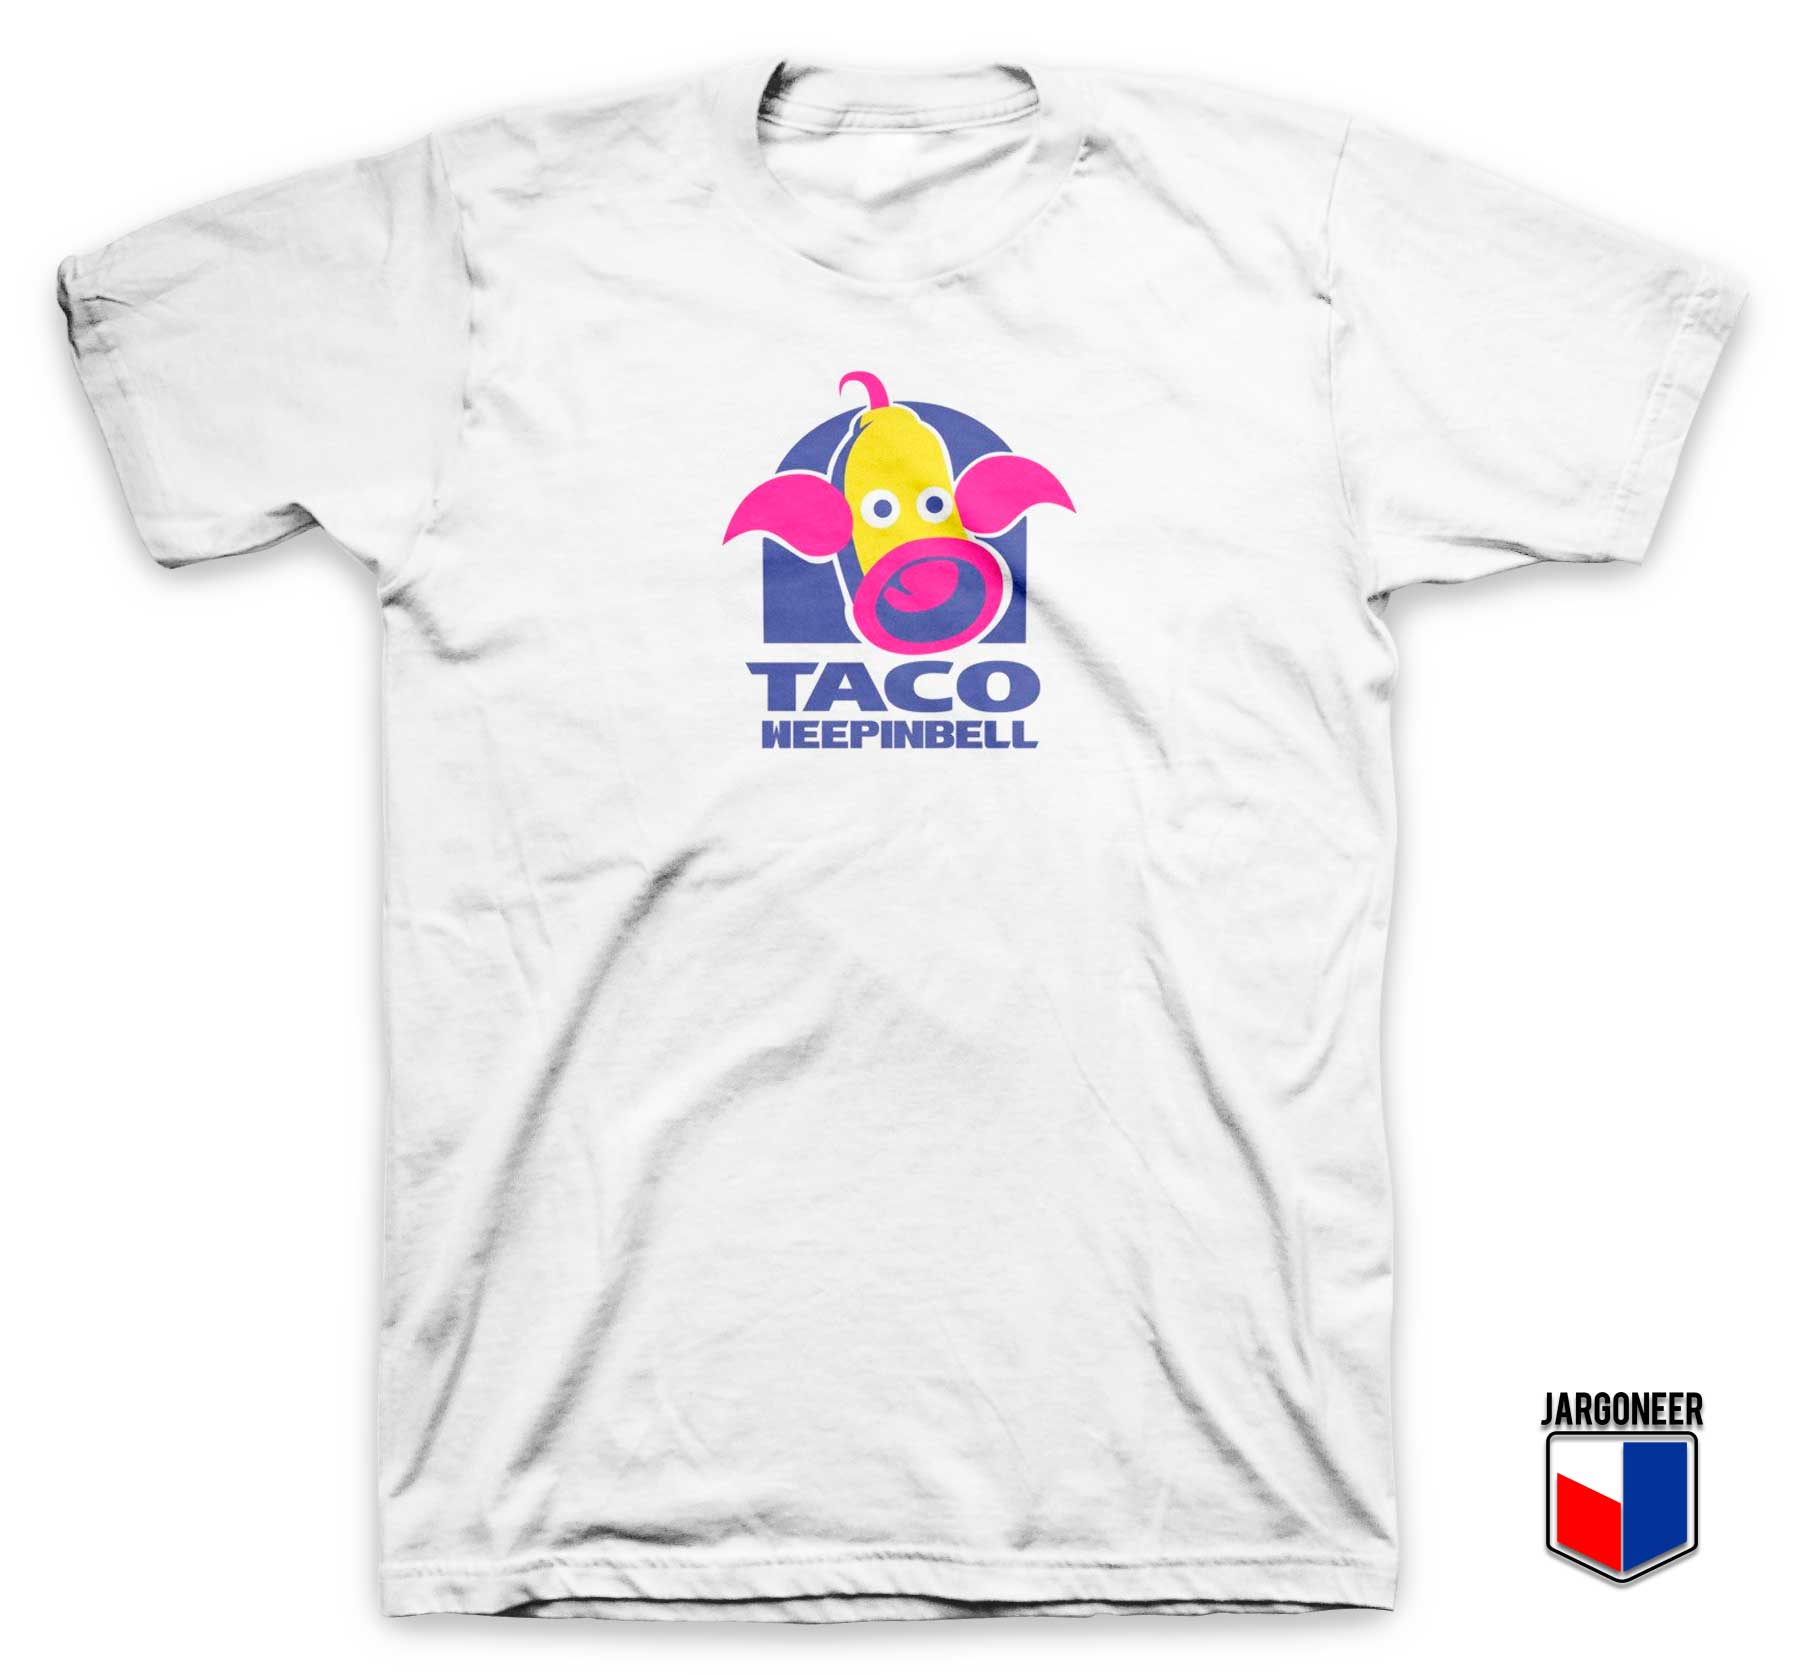 Taco Weepinbell Taco Bell Parody T Shirt - Shop Unique Graphic Cool Shirt Designs